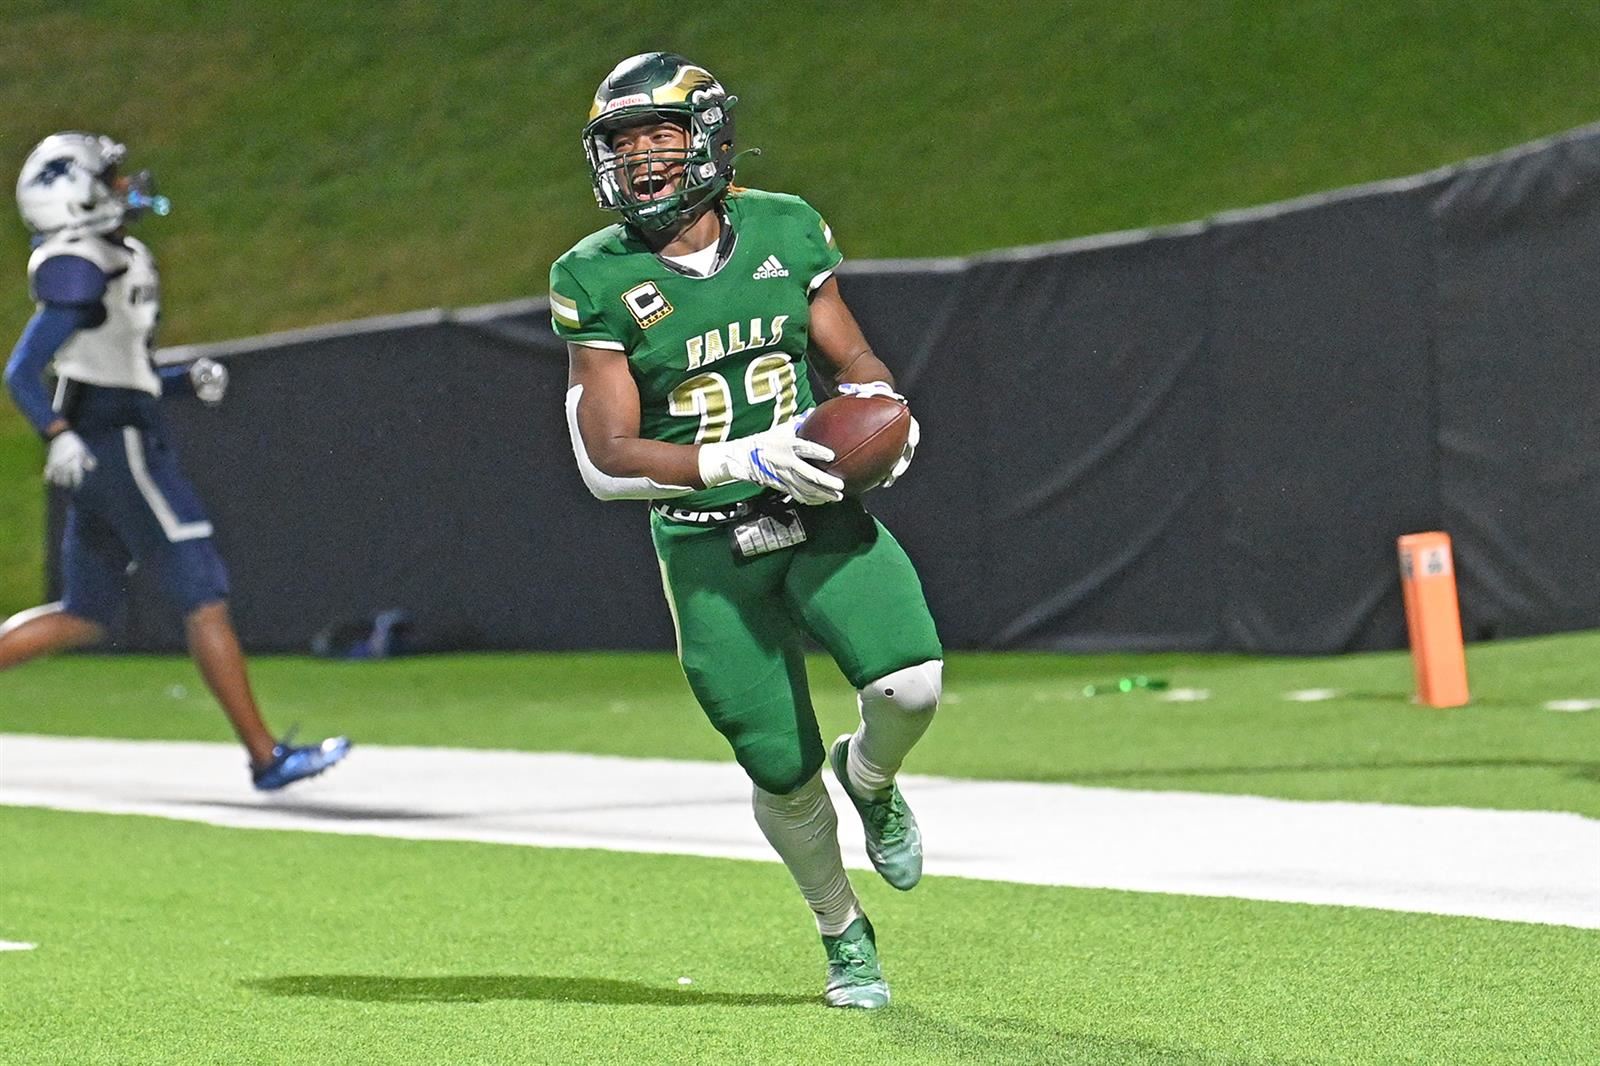 Cypress Falls High School junior running back Trey Morris was voted District 16-6A Offensive MVP.